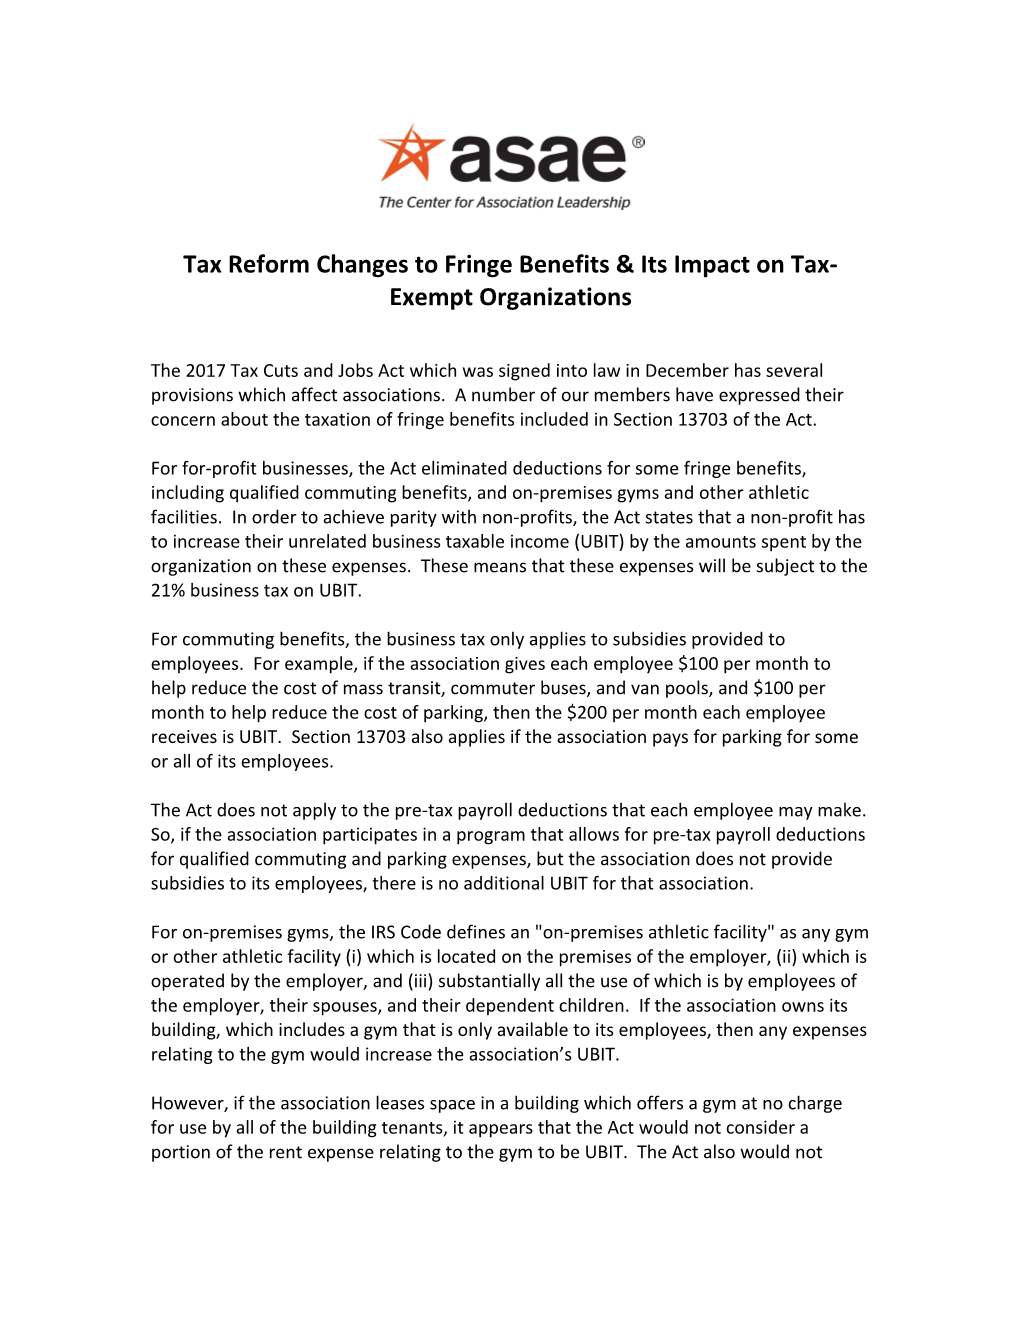 Tax Reform Changes to Fringe Benefits & Its Impact on Tax-Exempt Organizations